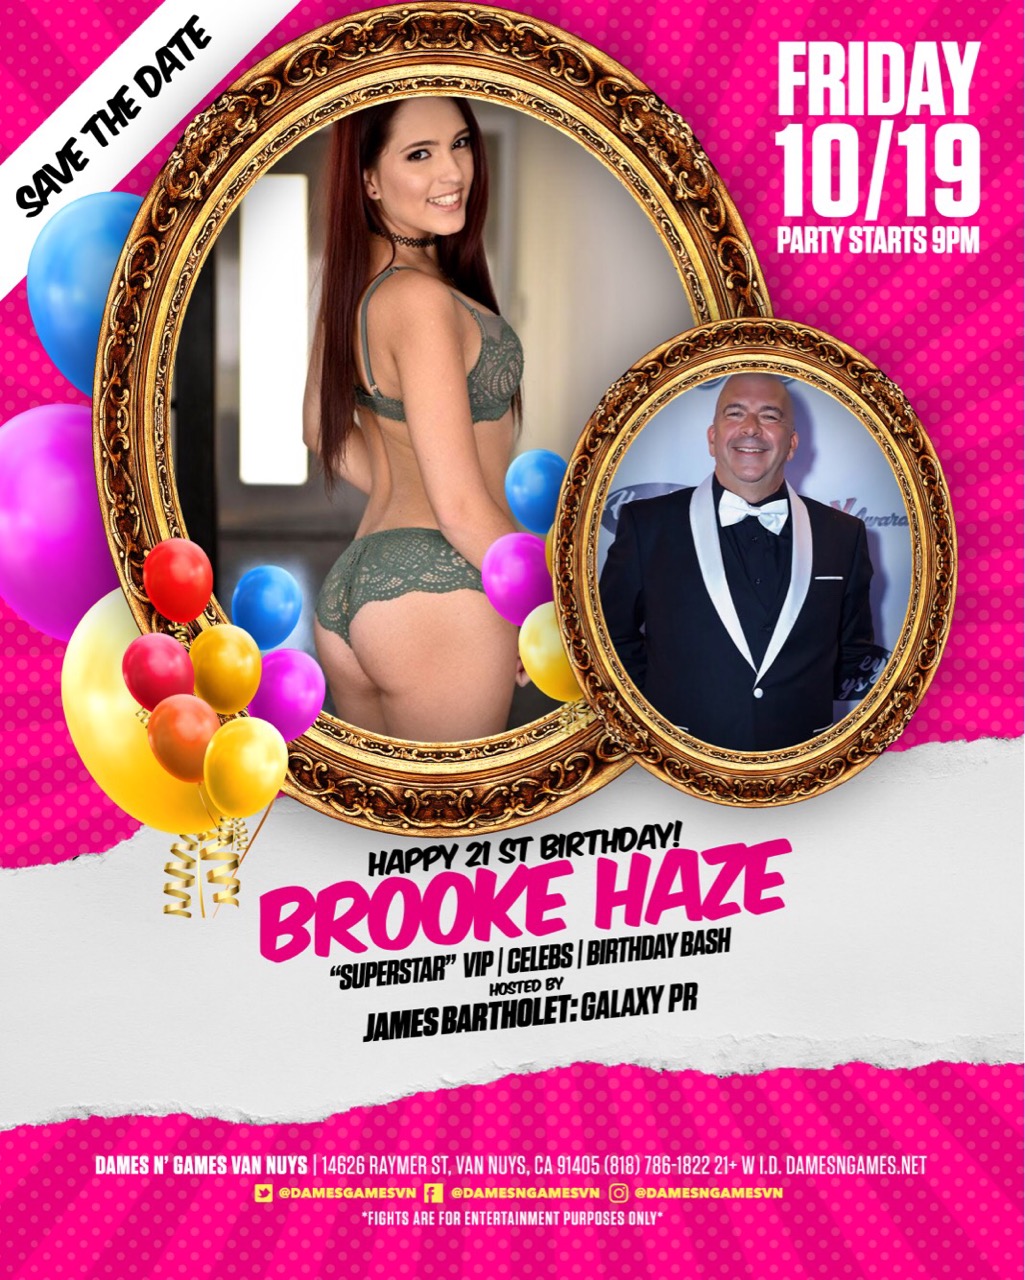 “Brooke Haze’s 21st Birthday Party this Friday October 19th”